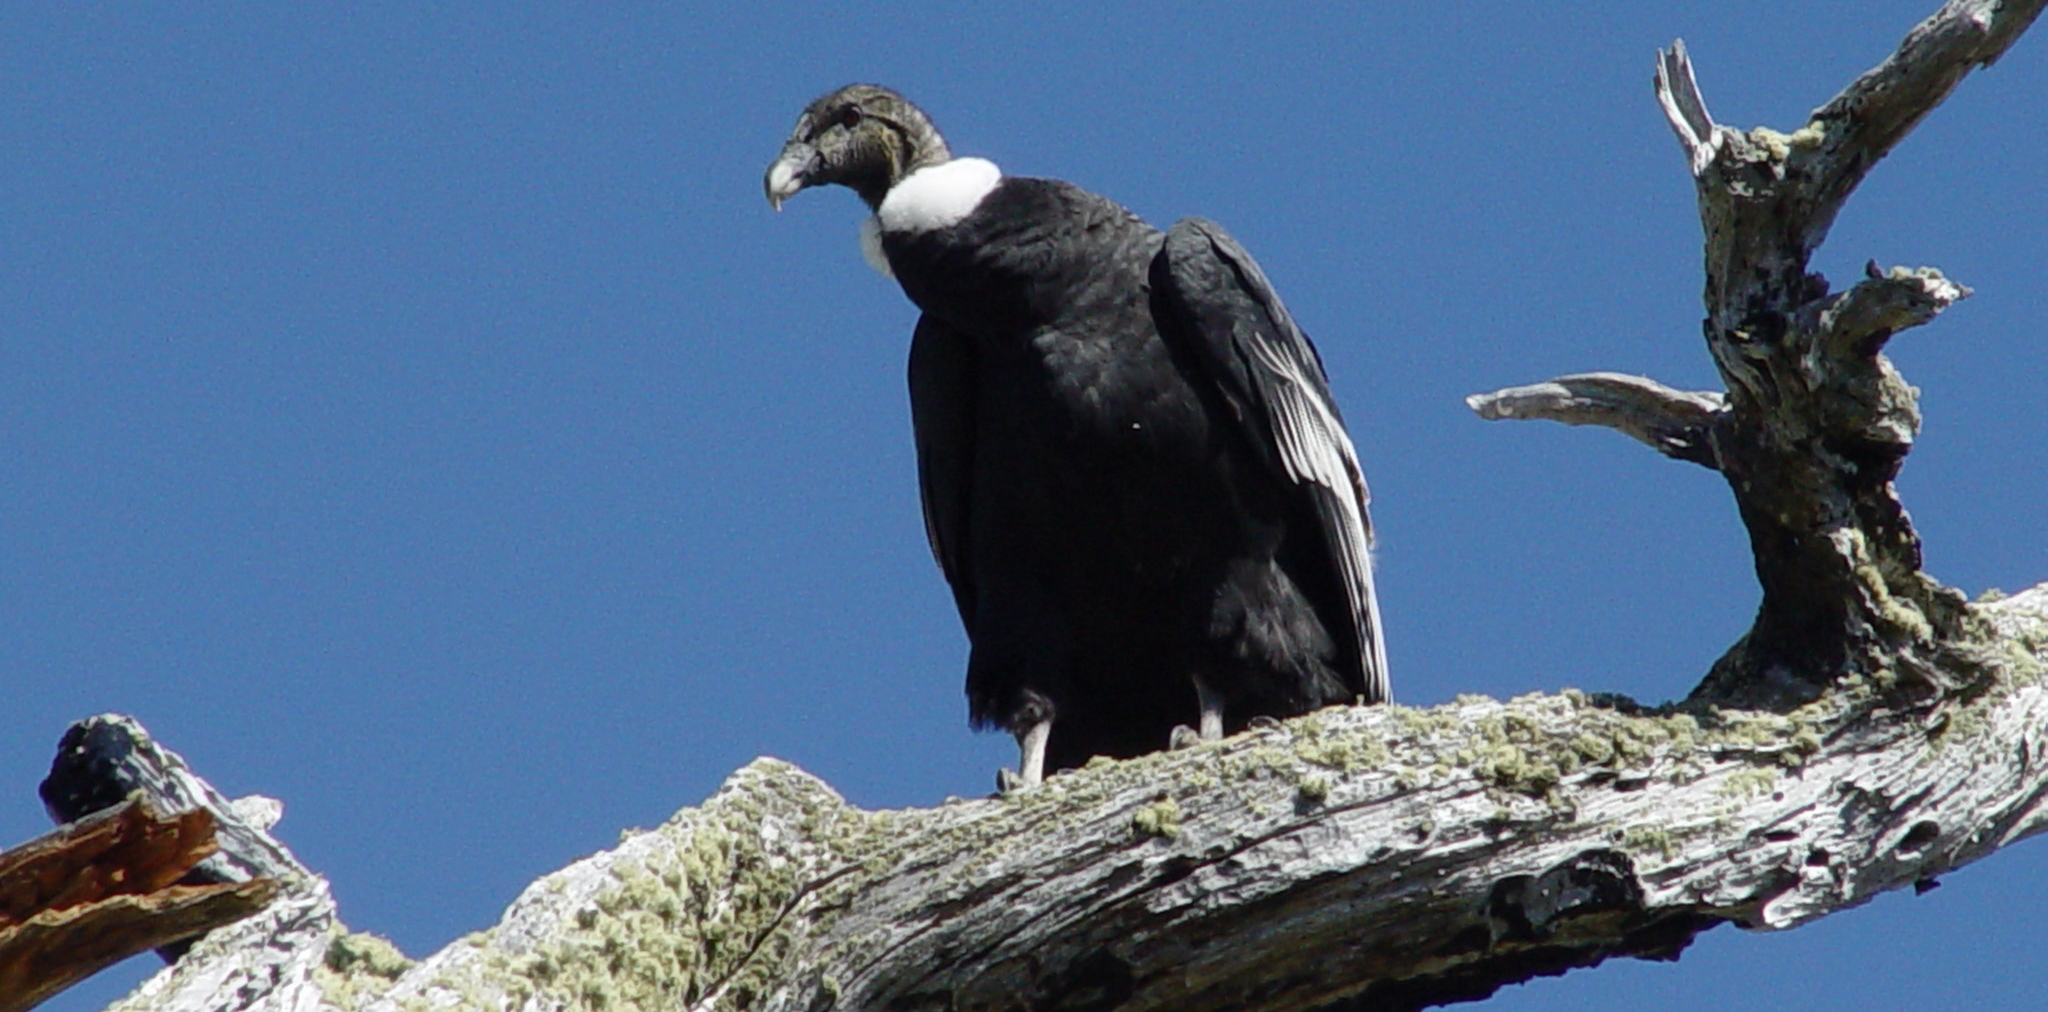 Photograph of a condor perched on a log against a blue sky.